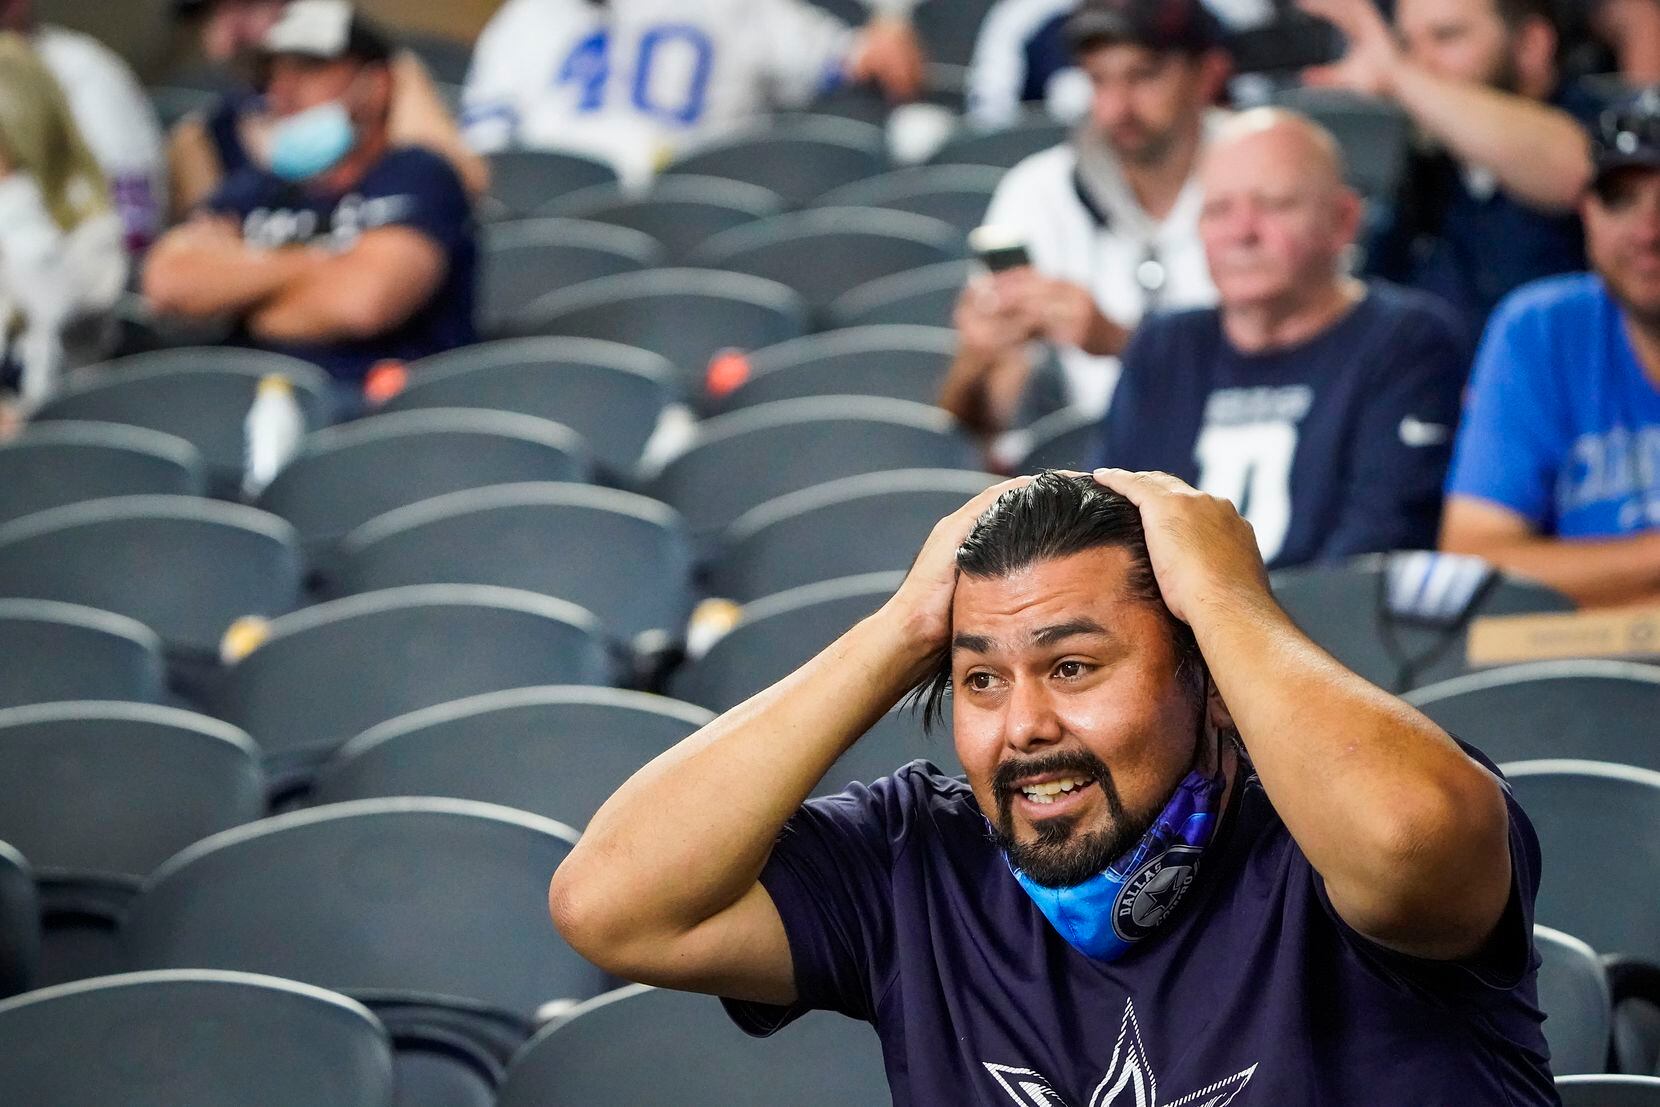 Dallas Cowboys fans Jamie Ramirez, of Amarillo, Texas, reacts after quarterback Dak Prescott was injured on a tackle by New York Giants cornerback Logan Ryan during the third quarter of an NFL football game at AT&T Stadium on Sunday, Oct. 11, 2020, in Arlington. Prescott was injured o the play when Ryan came down on his right leg and left the game. (Smiley N. Pool/The Dallas Morning News)